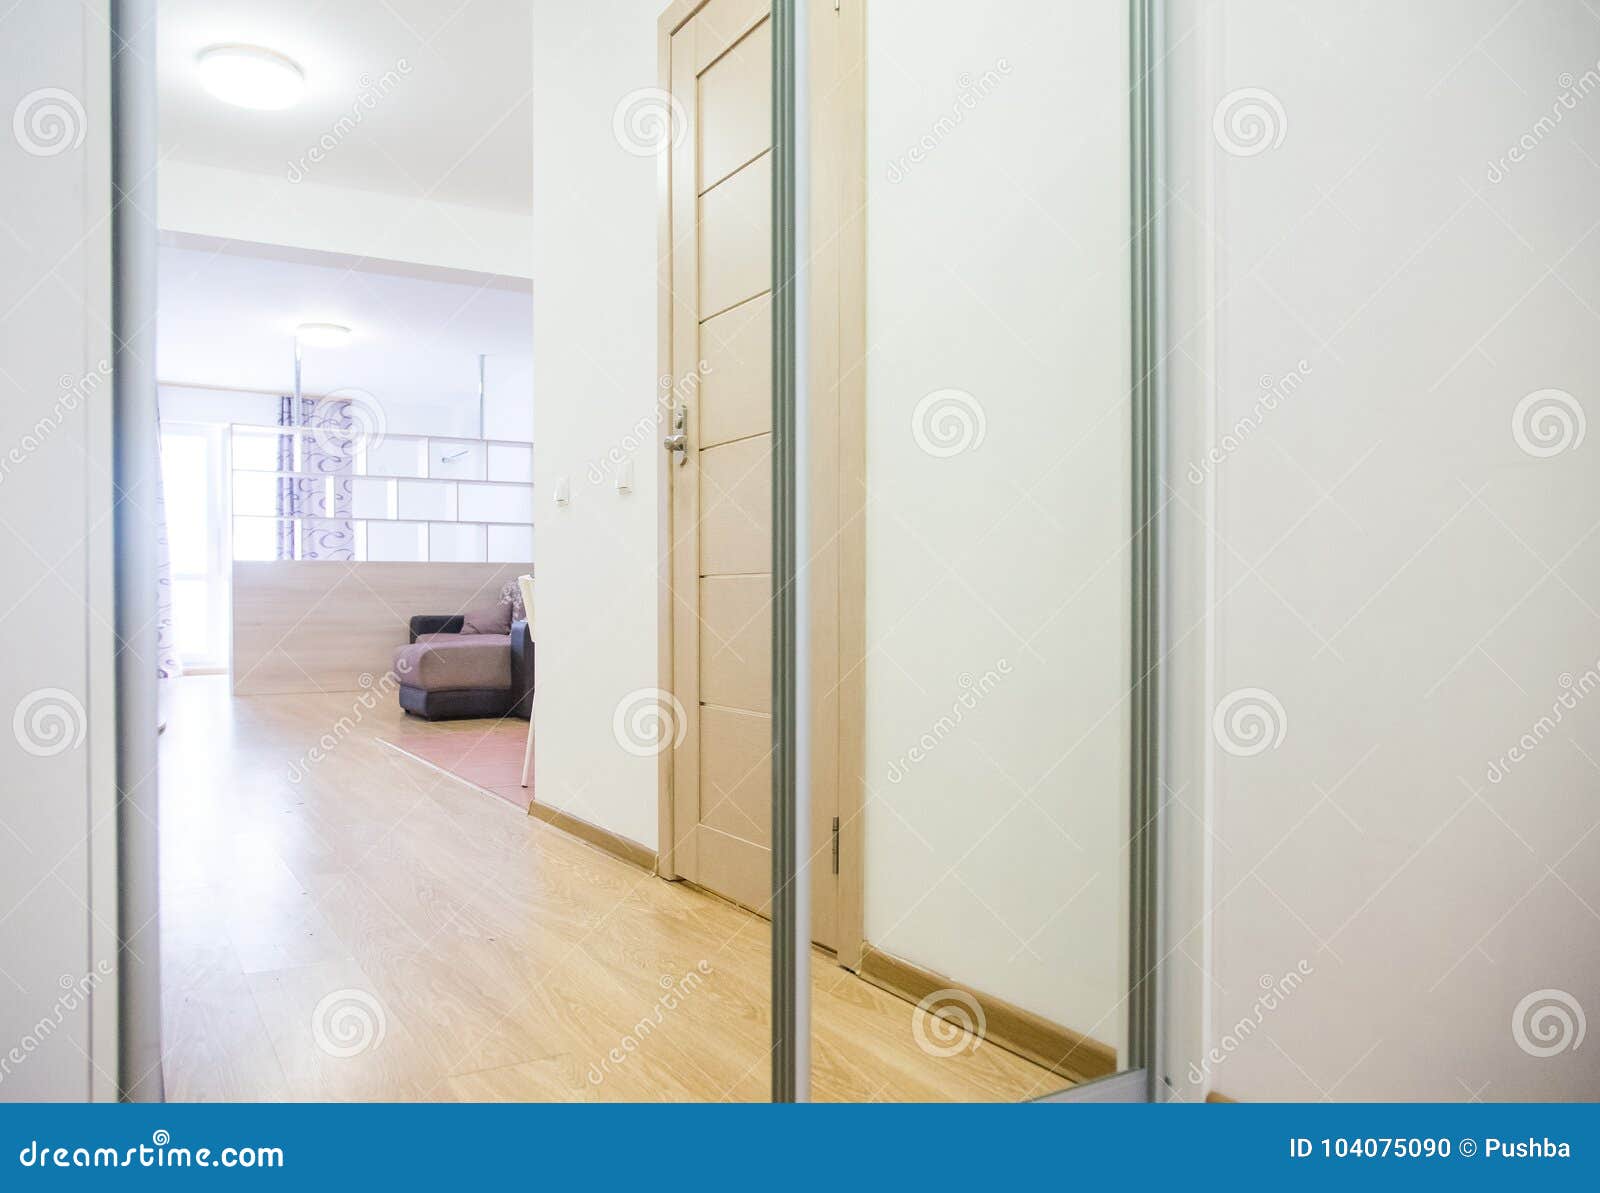 Brown Cabinet With Mirror Doors Stock Photo Image Of Glass